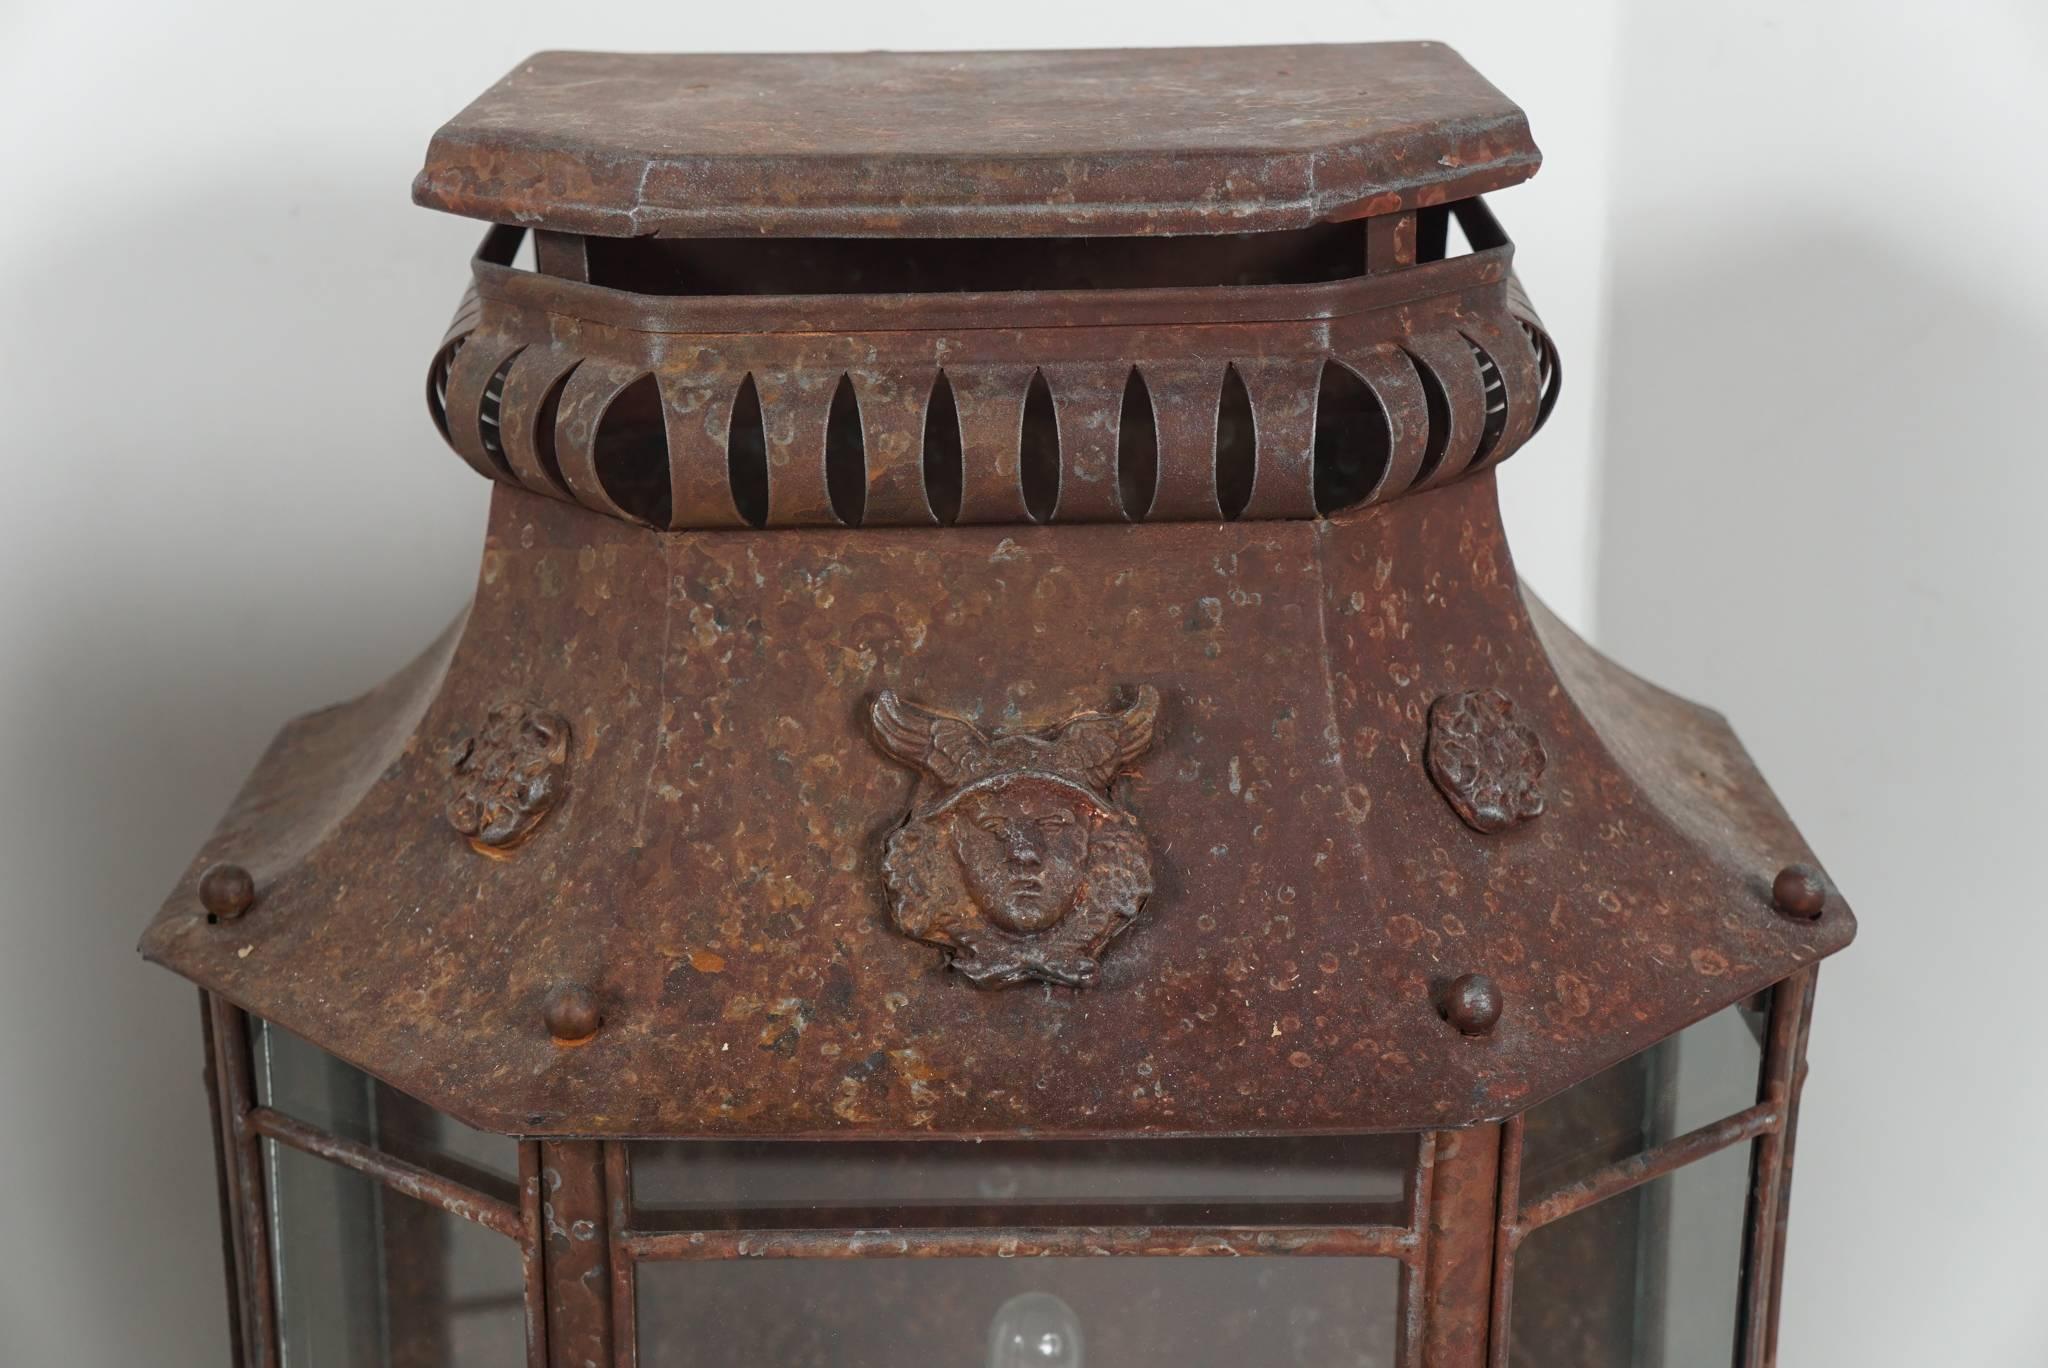 This pair of large-scale lanterns designed as wall-mounted lighting was made in France, circa 1920. Designed in an antique fashion the work is handmade and they have acquired a magnificent old patina. The form is further enhanced with cast and